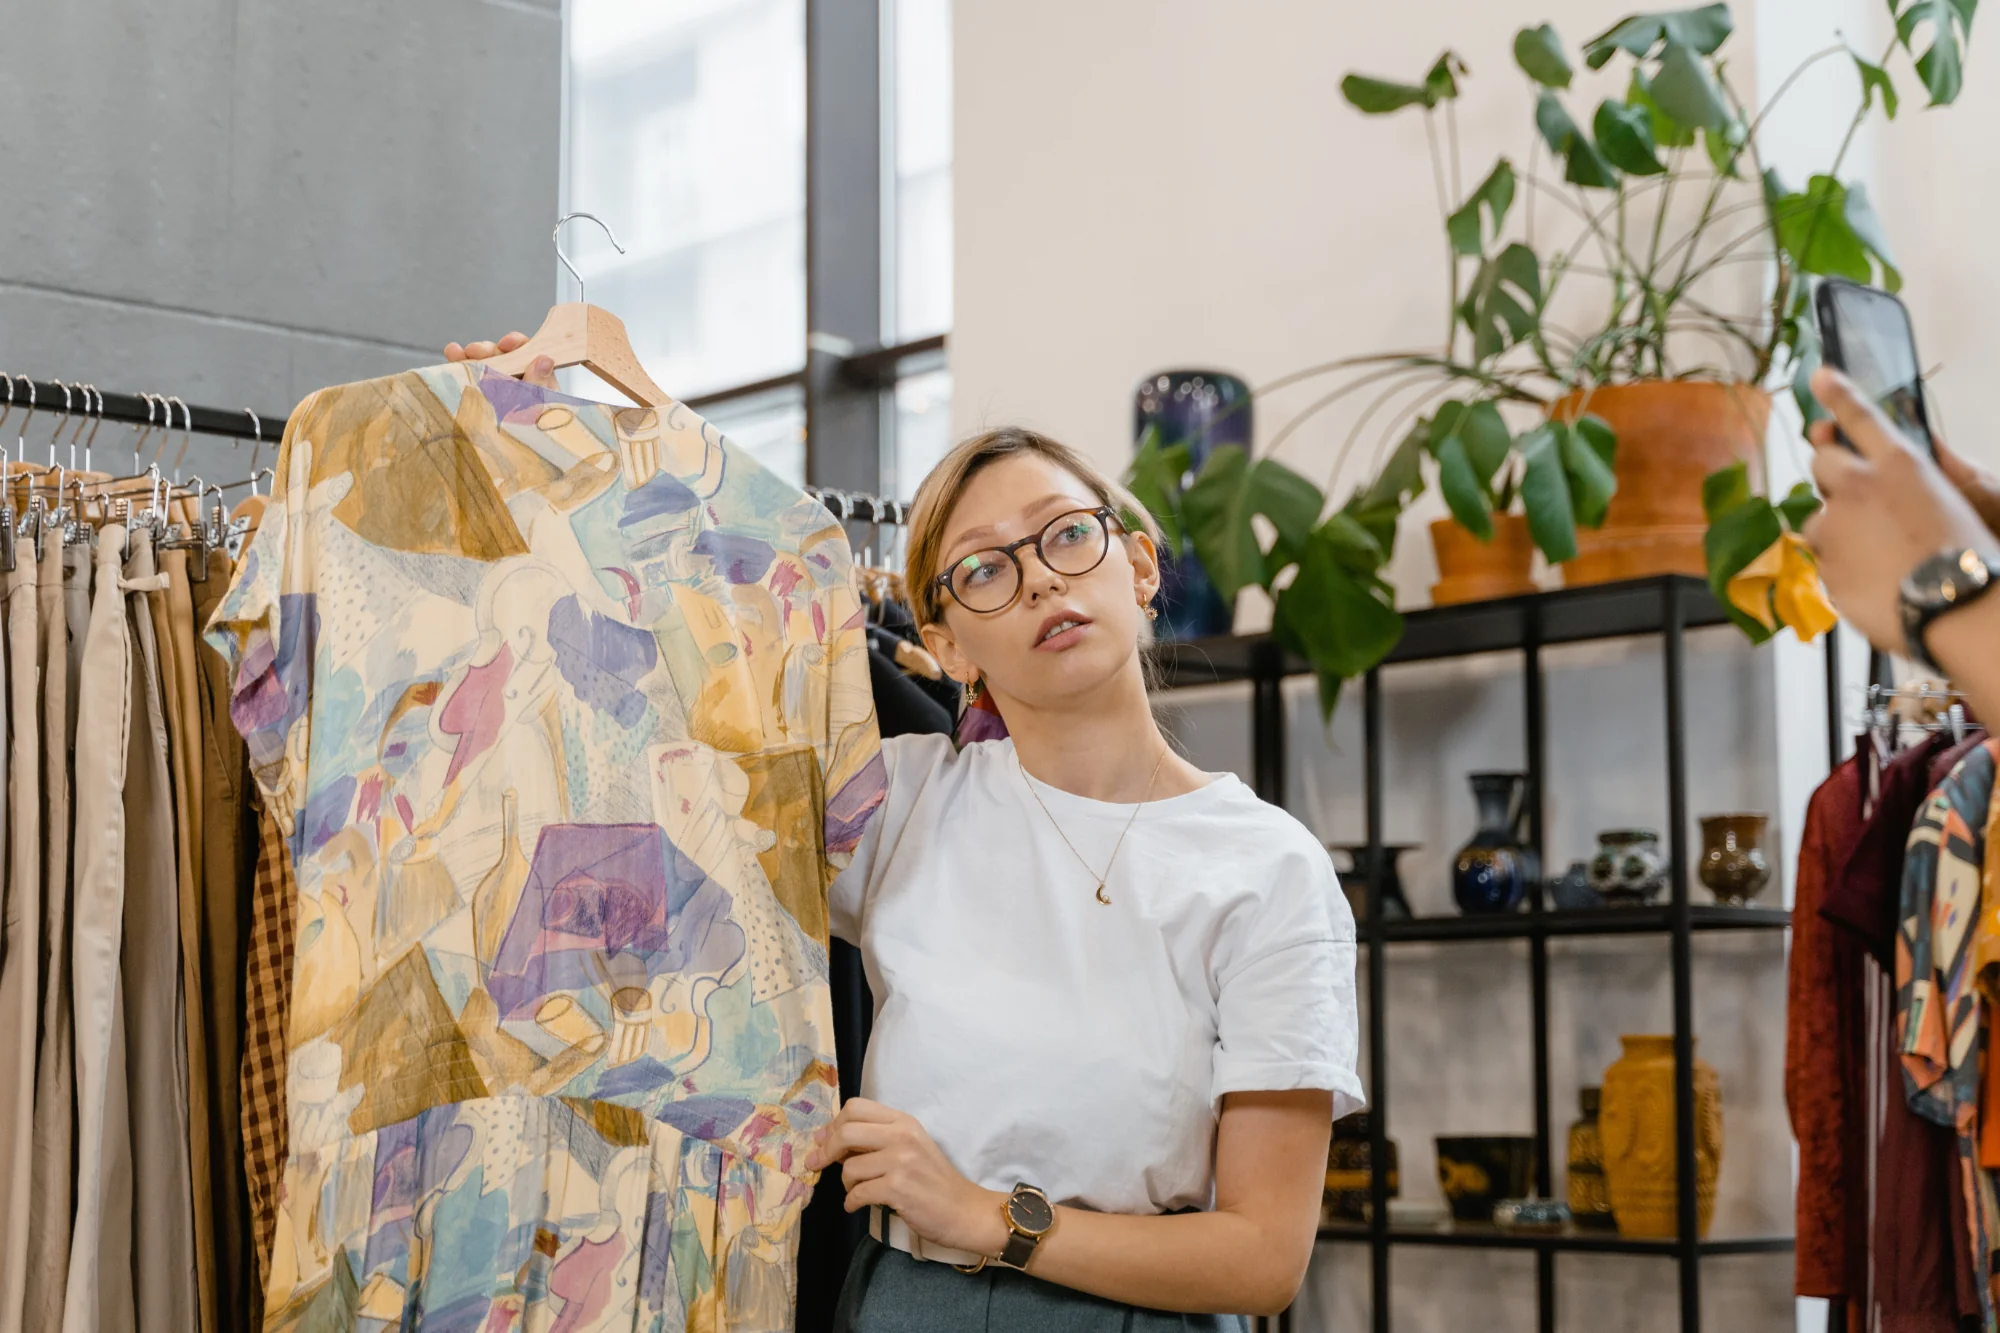 A woman holds up a vintage shirt in a retail store